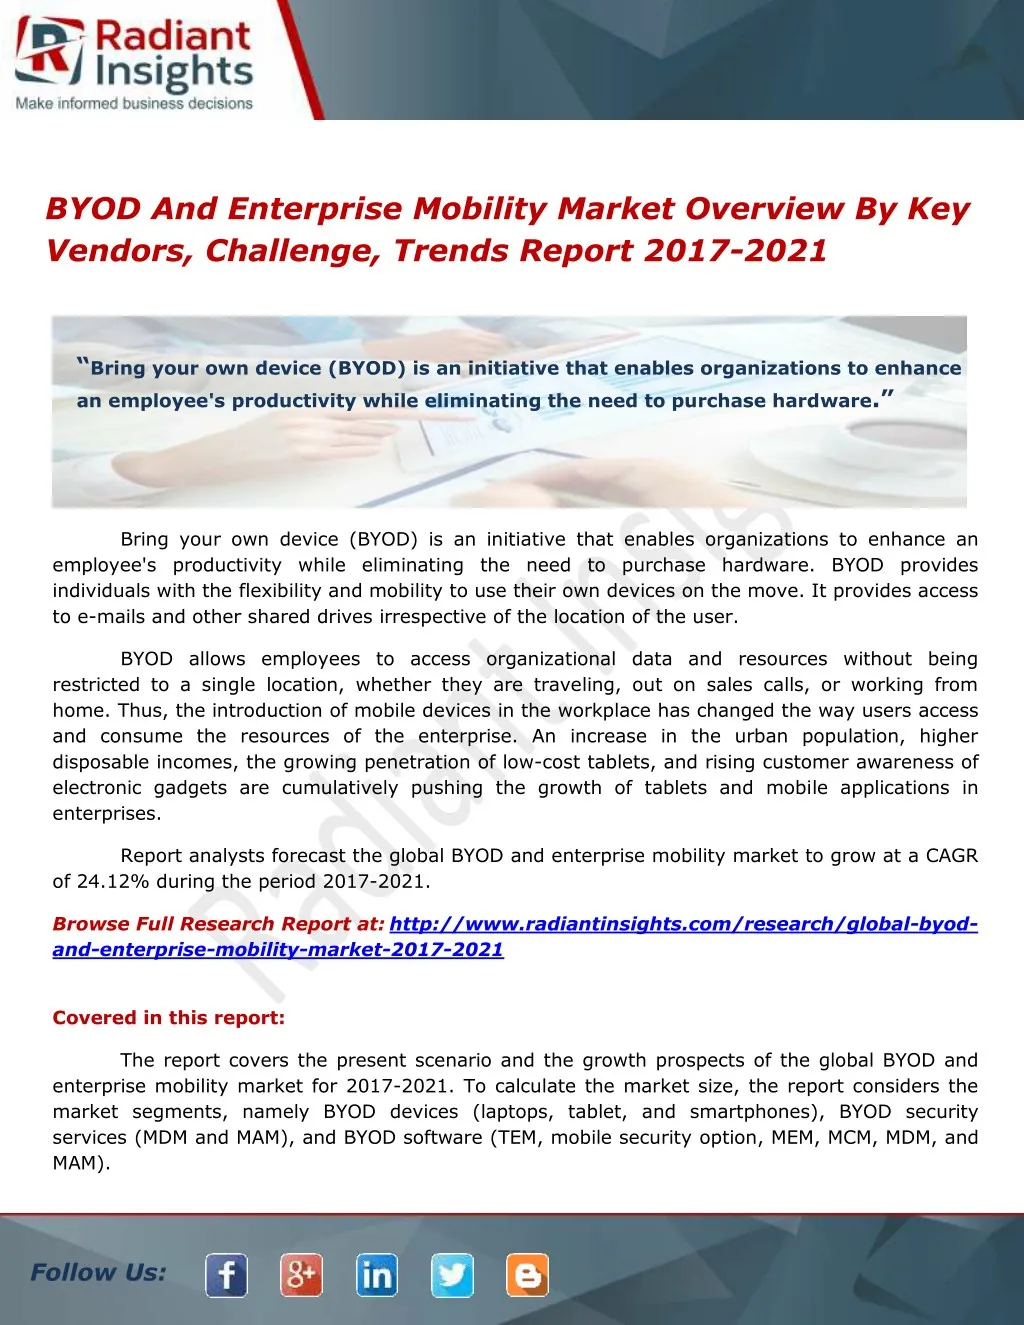 byod and enterprise mobility market overview